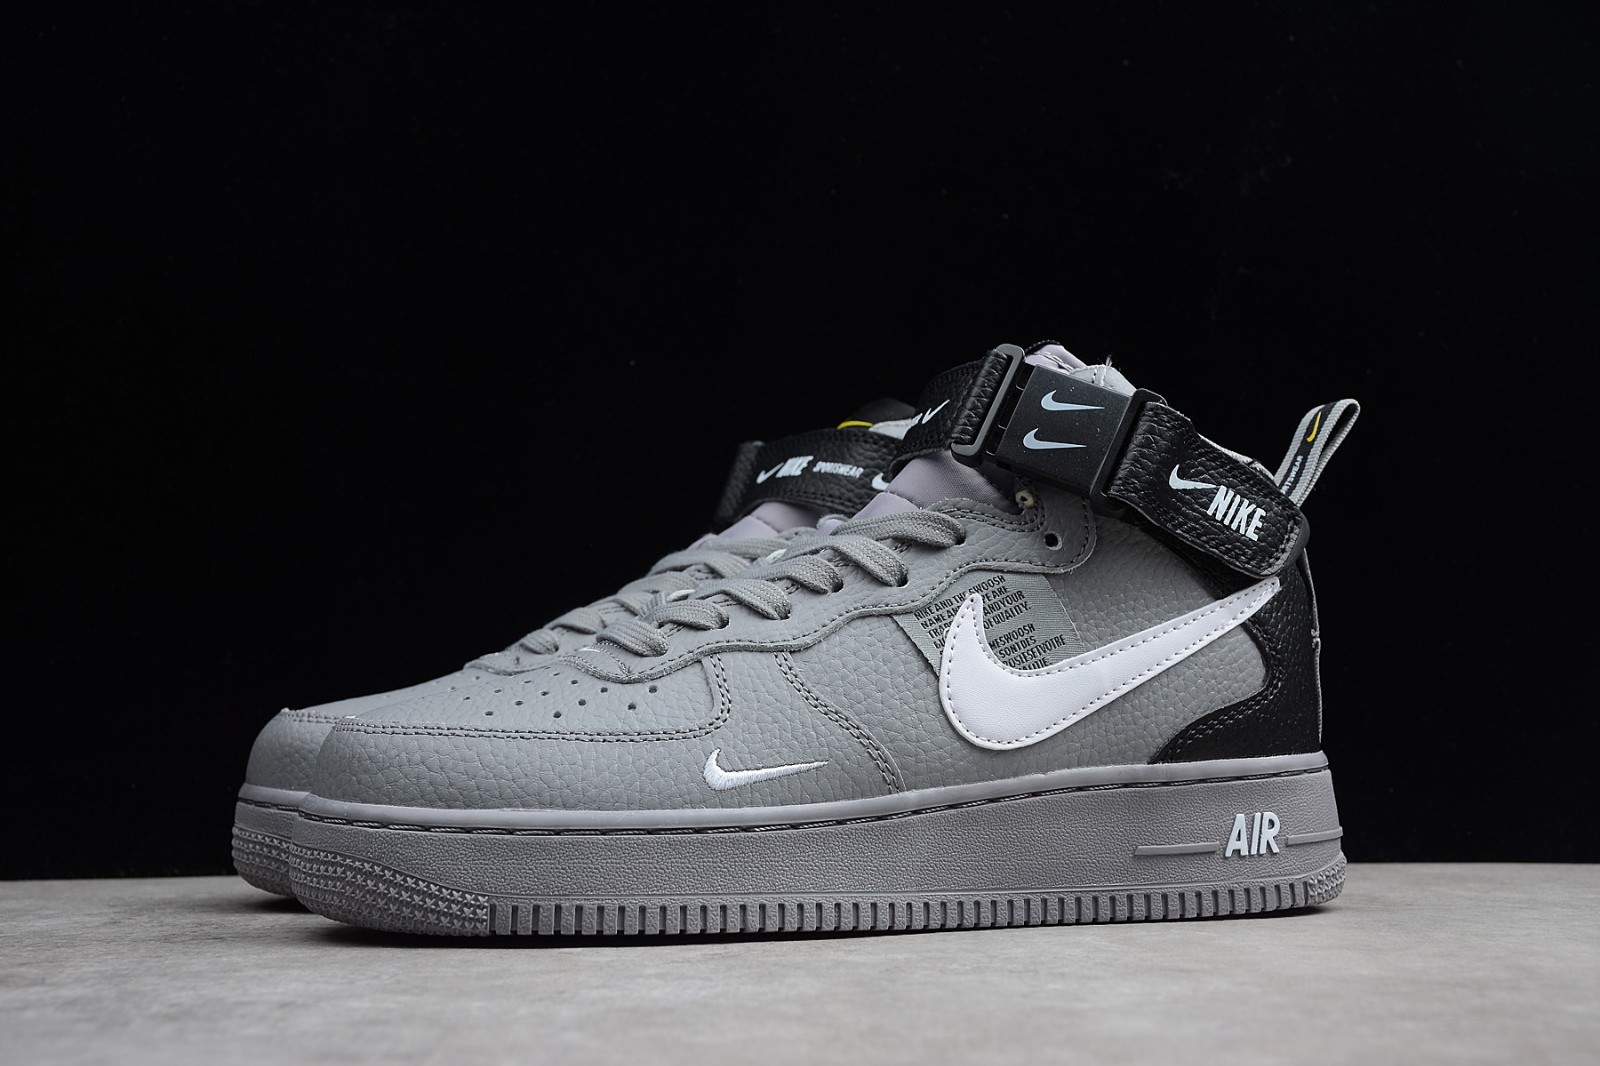 Beheer investering Agnes Gray Nike Air Force 1 Mid LV8 Utility Grey White Black 804609 - nike lebron  soldiers for kids to draw - StclaircomoShops - 006